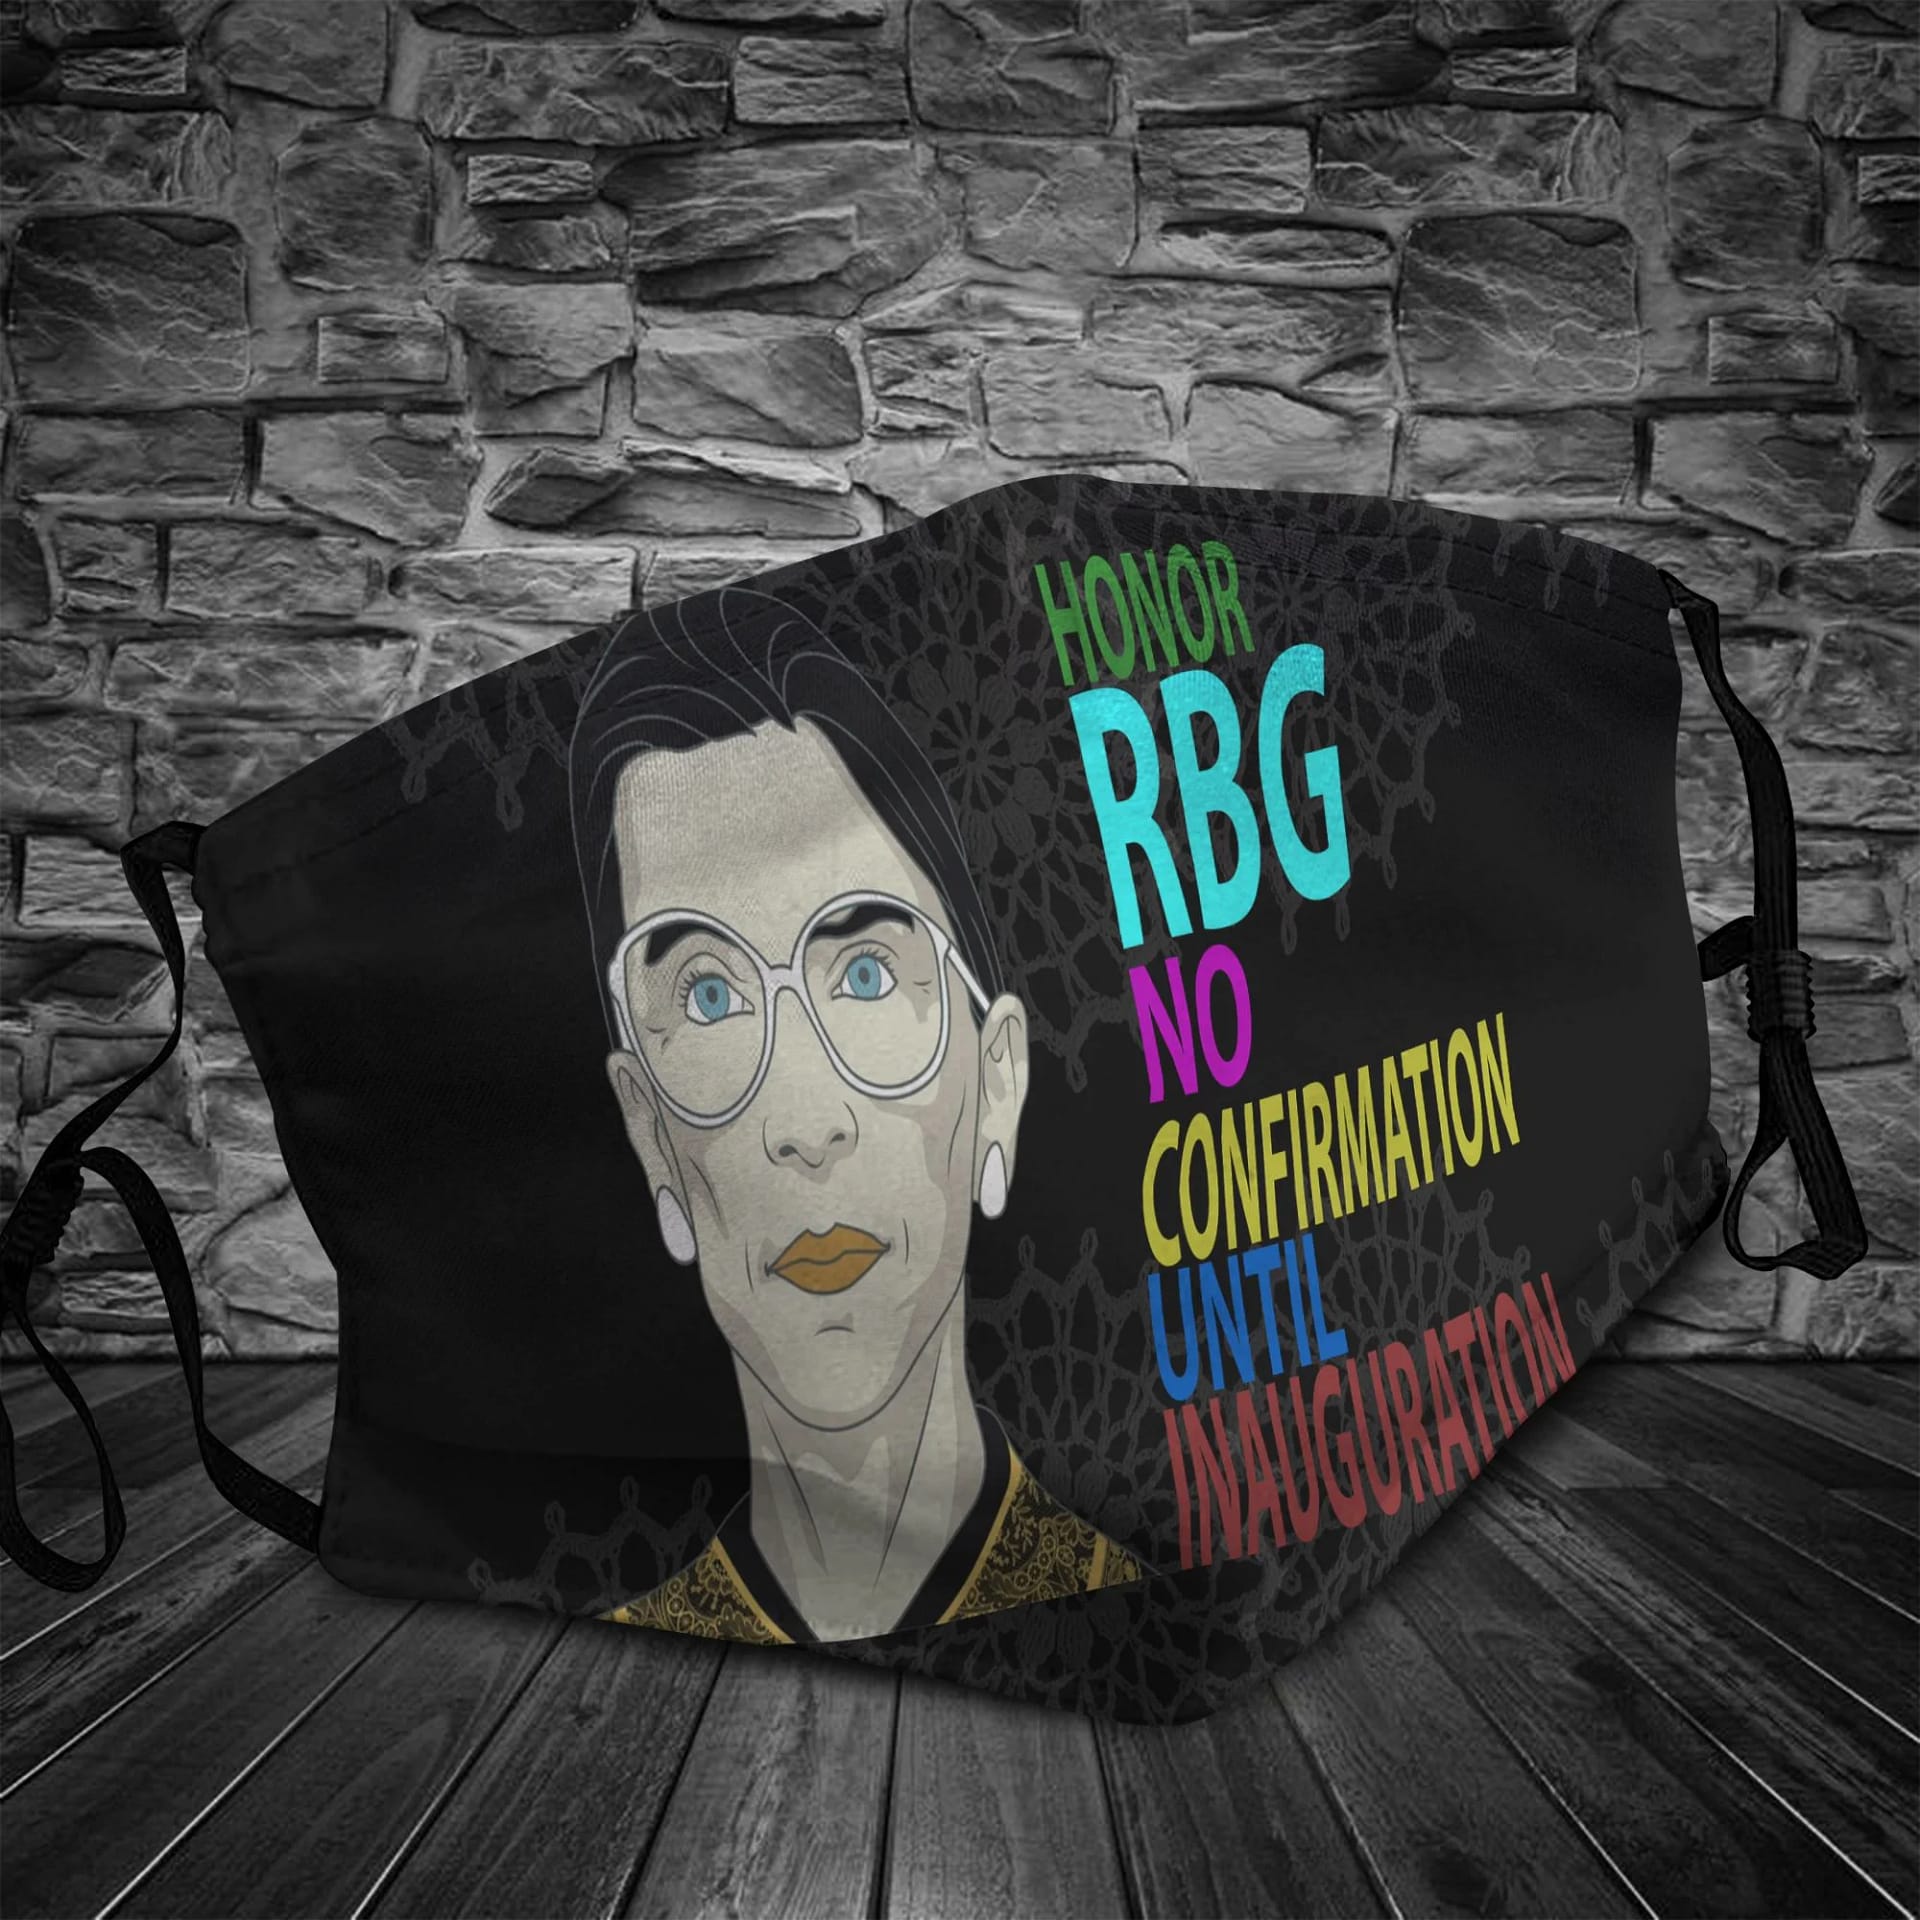 Honor Rbg No Confirmation Until Inauguration 2020 Face Mask